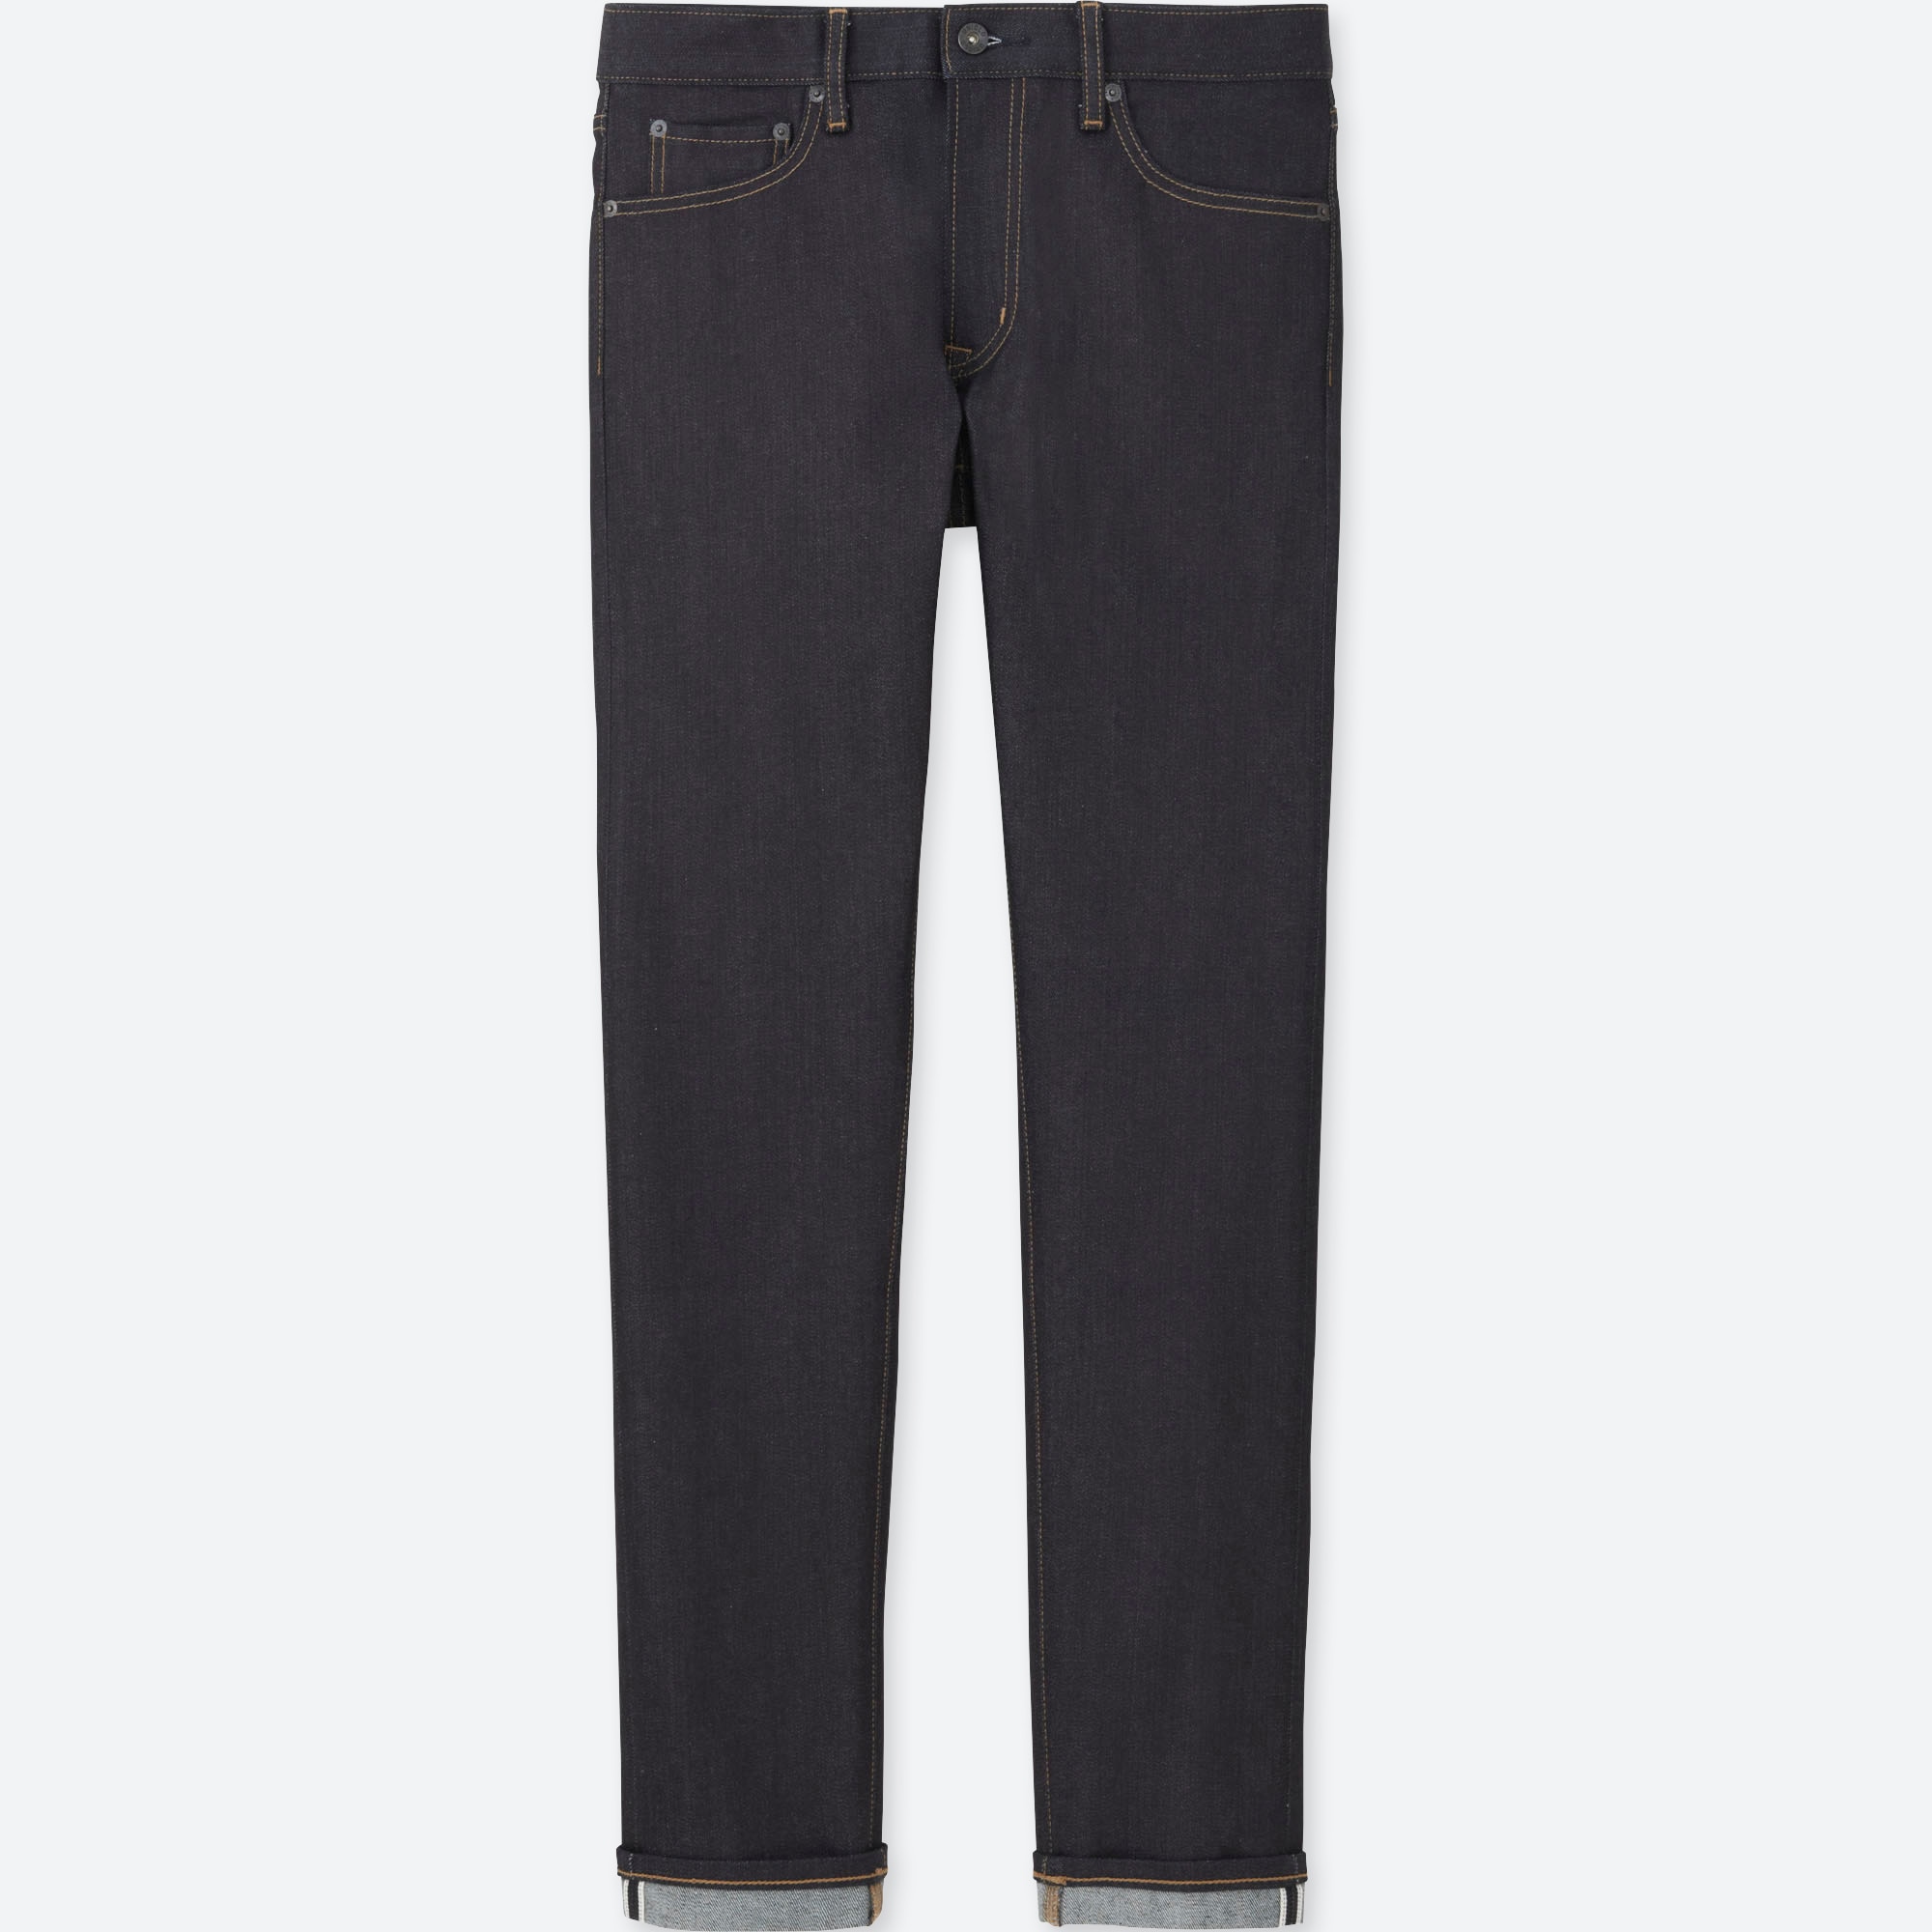 uniqlo selvedge skinny fit tapered jeans